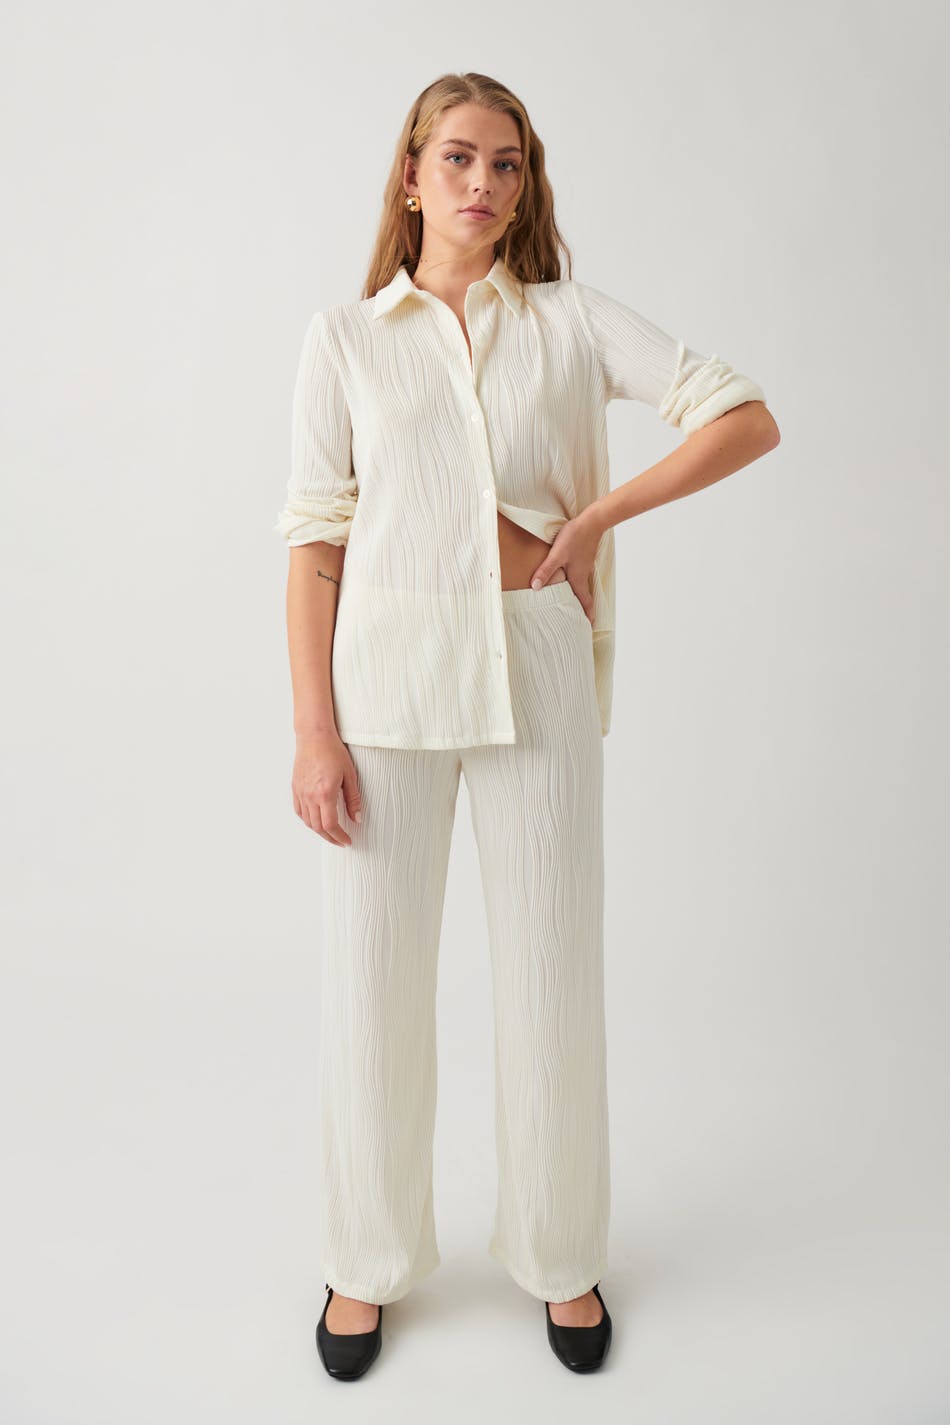 Gina Tricot - Structure trousers - byxor - White - M - Female